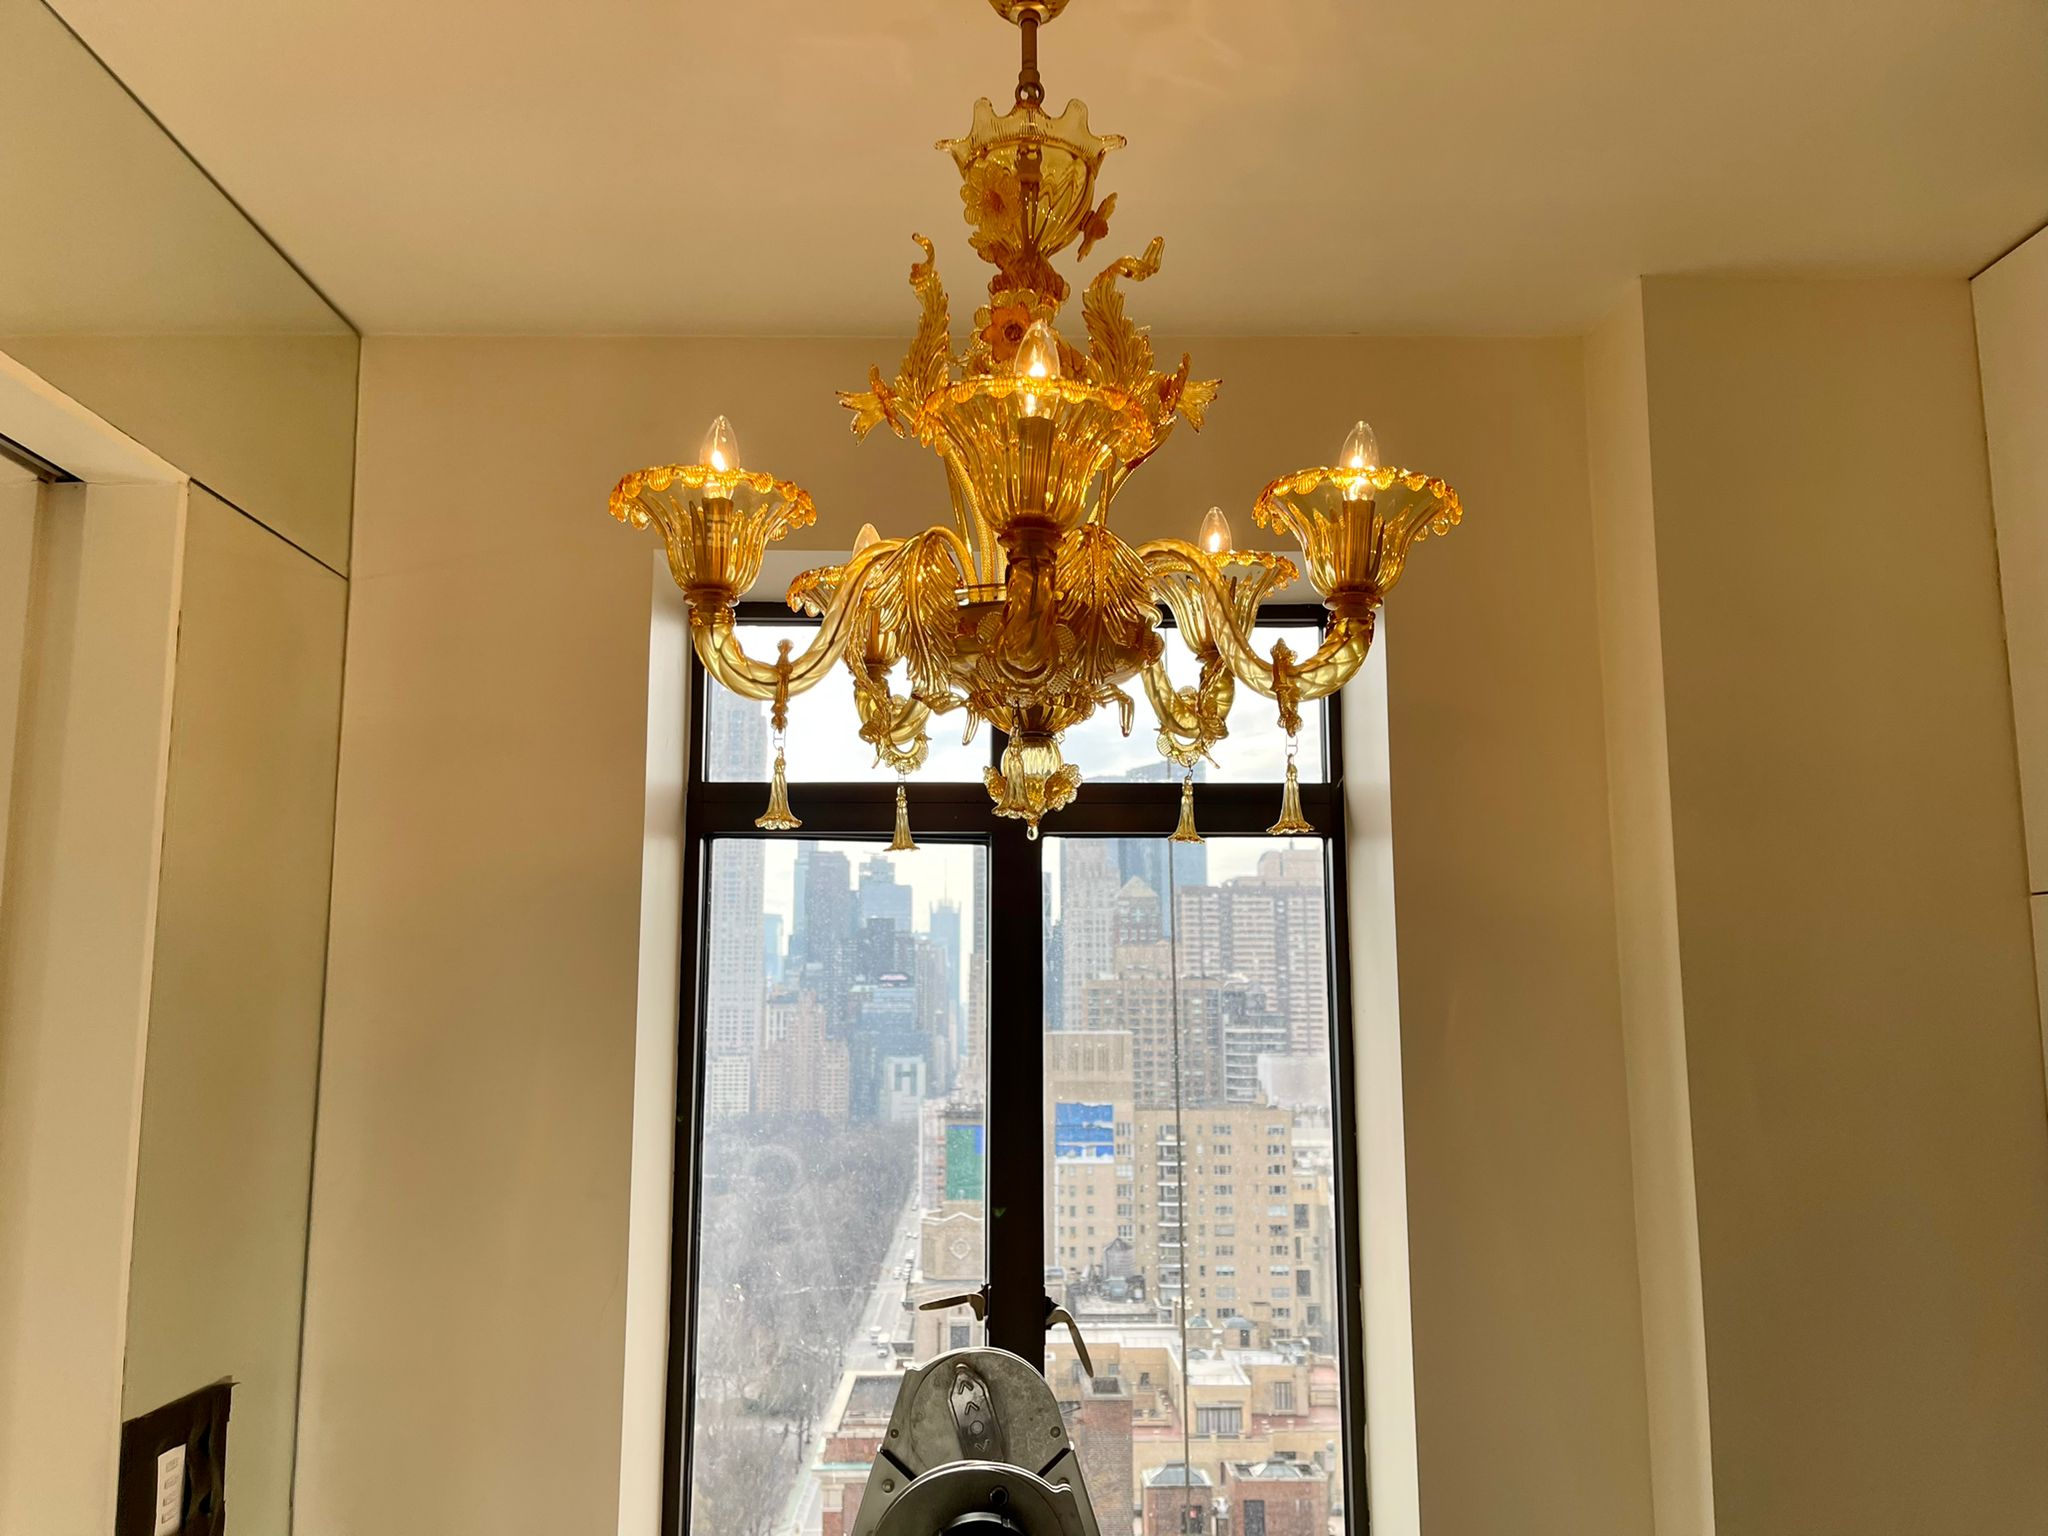 Professional chandelier cleaning pros near me